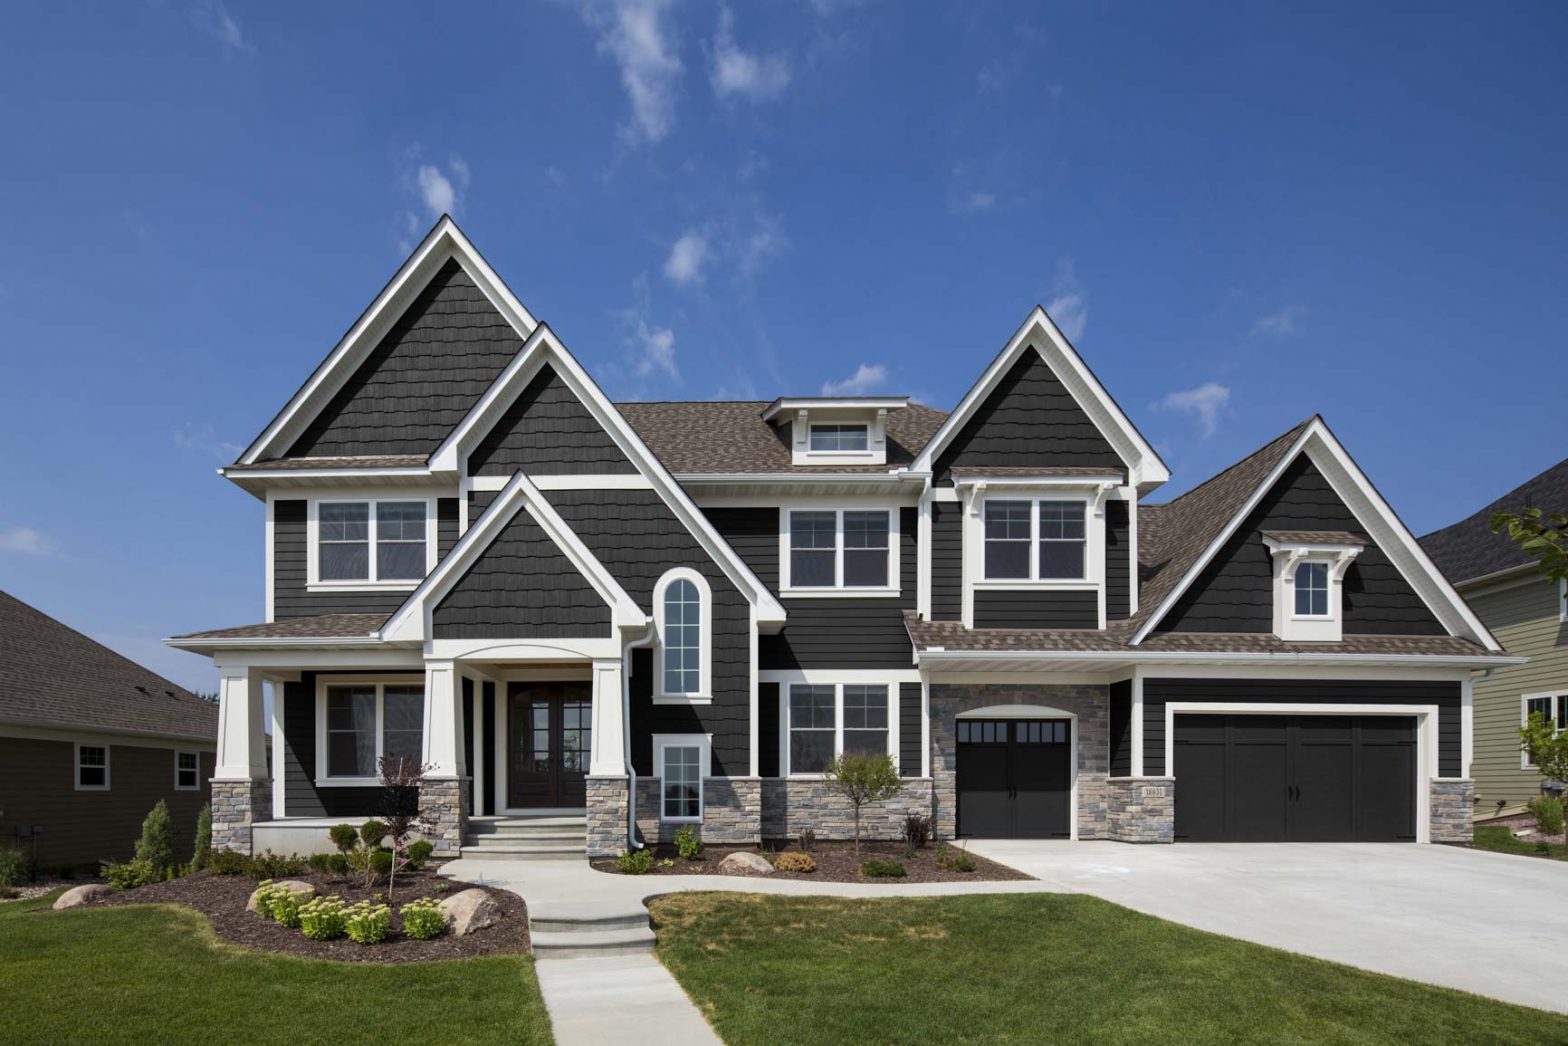 A new home with dark gray siding and white trim